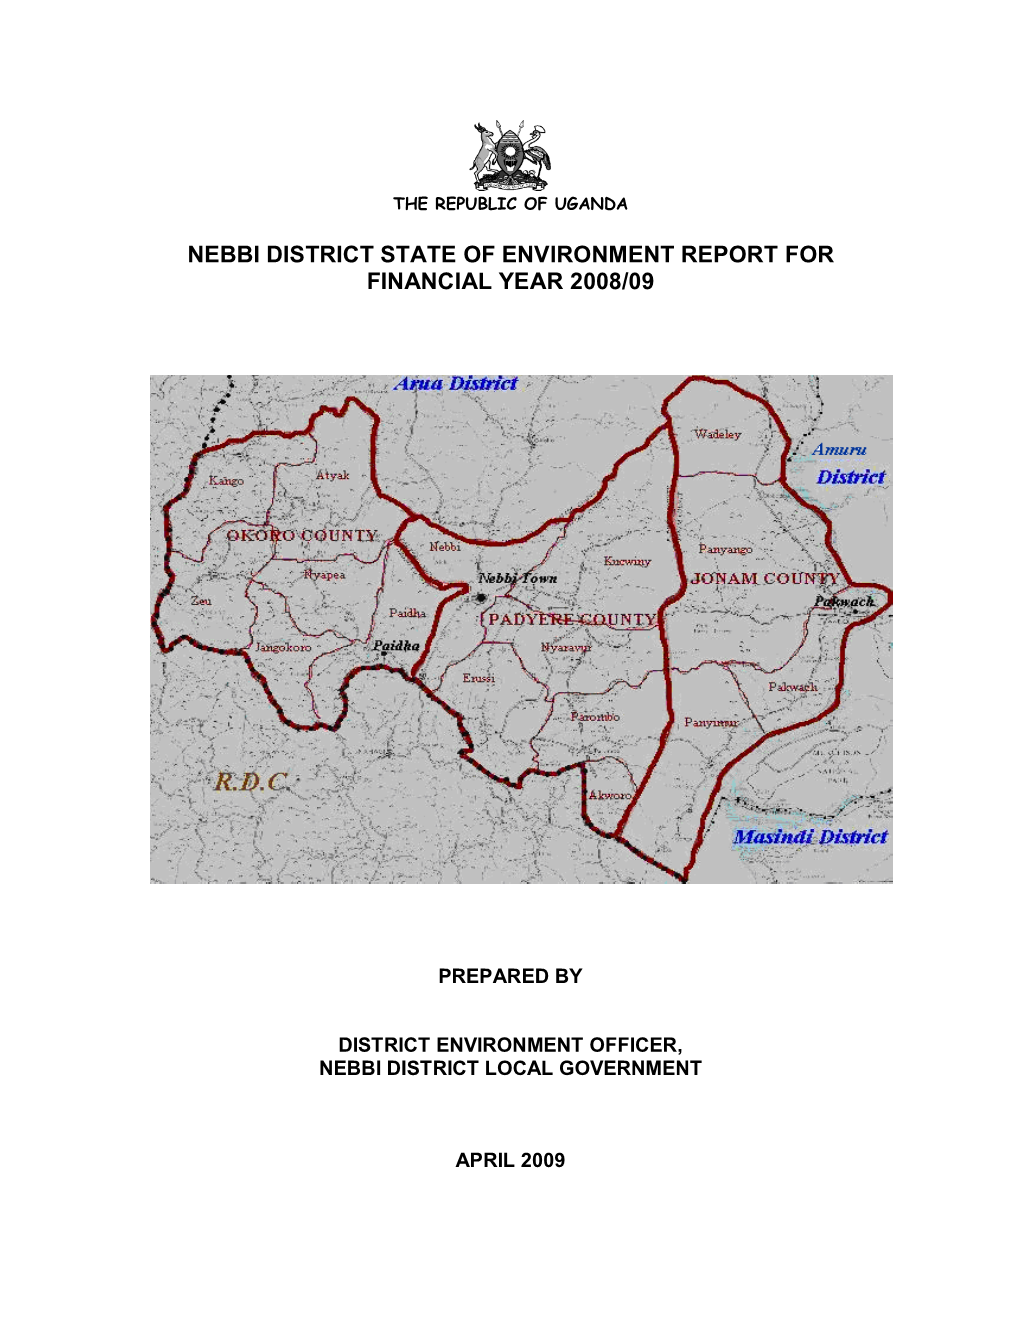 District State of Environment Report for Financial Year 2008/09